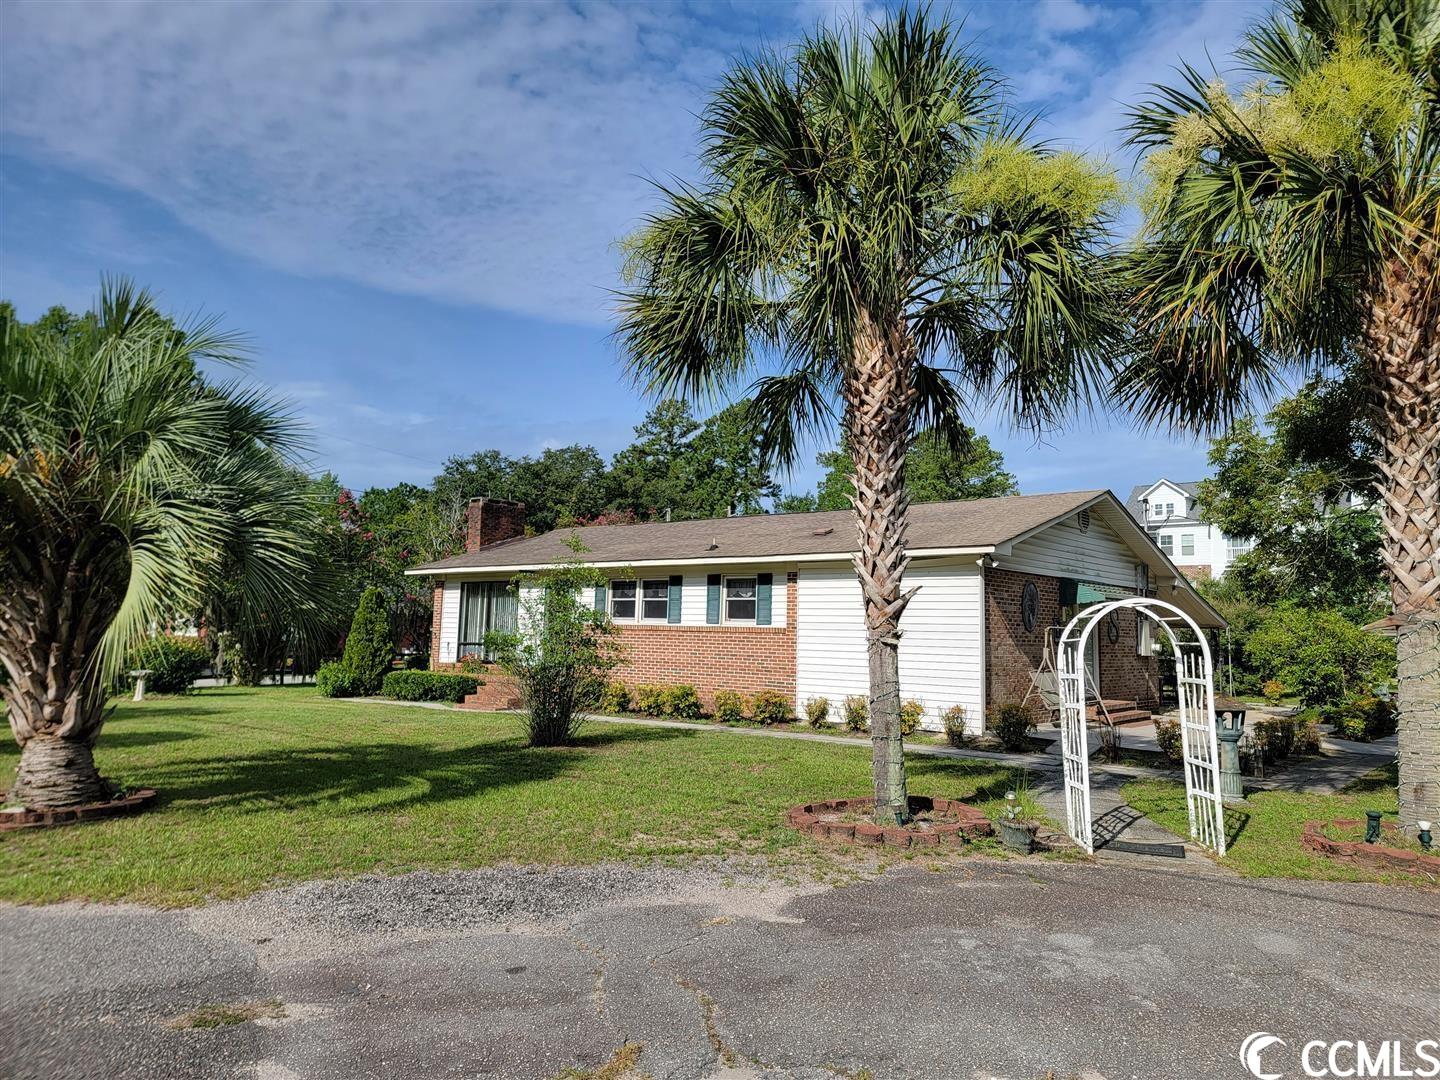 Myrtle Beach home for sale Conway Not within a Subdivision